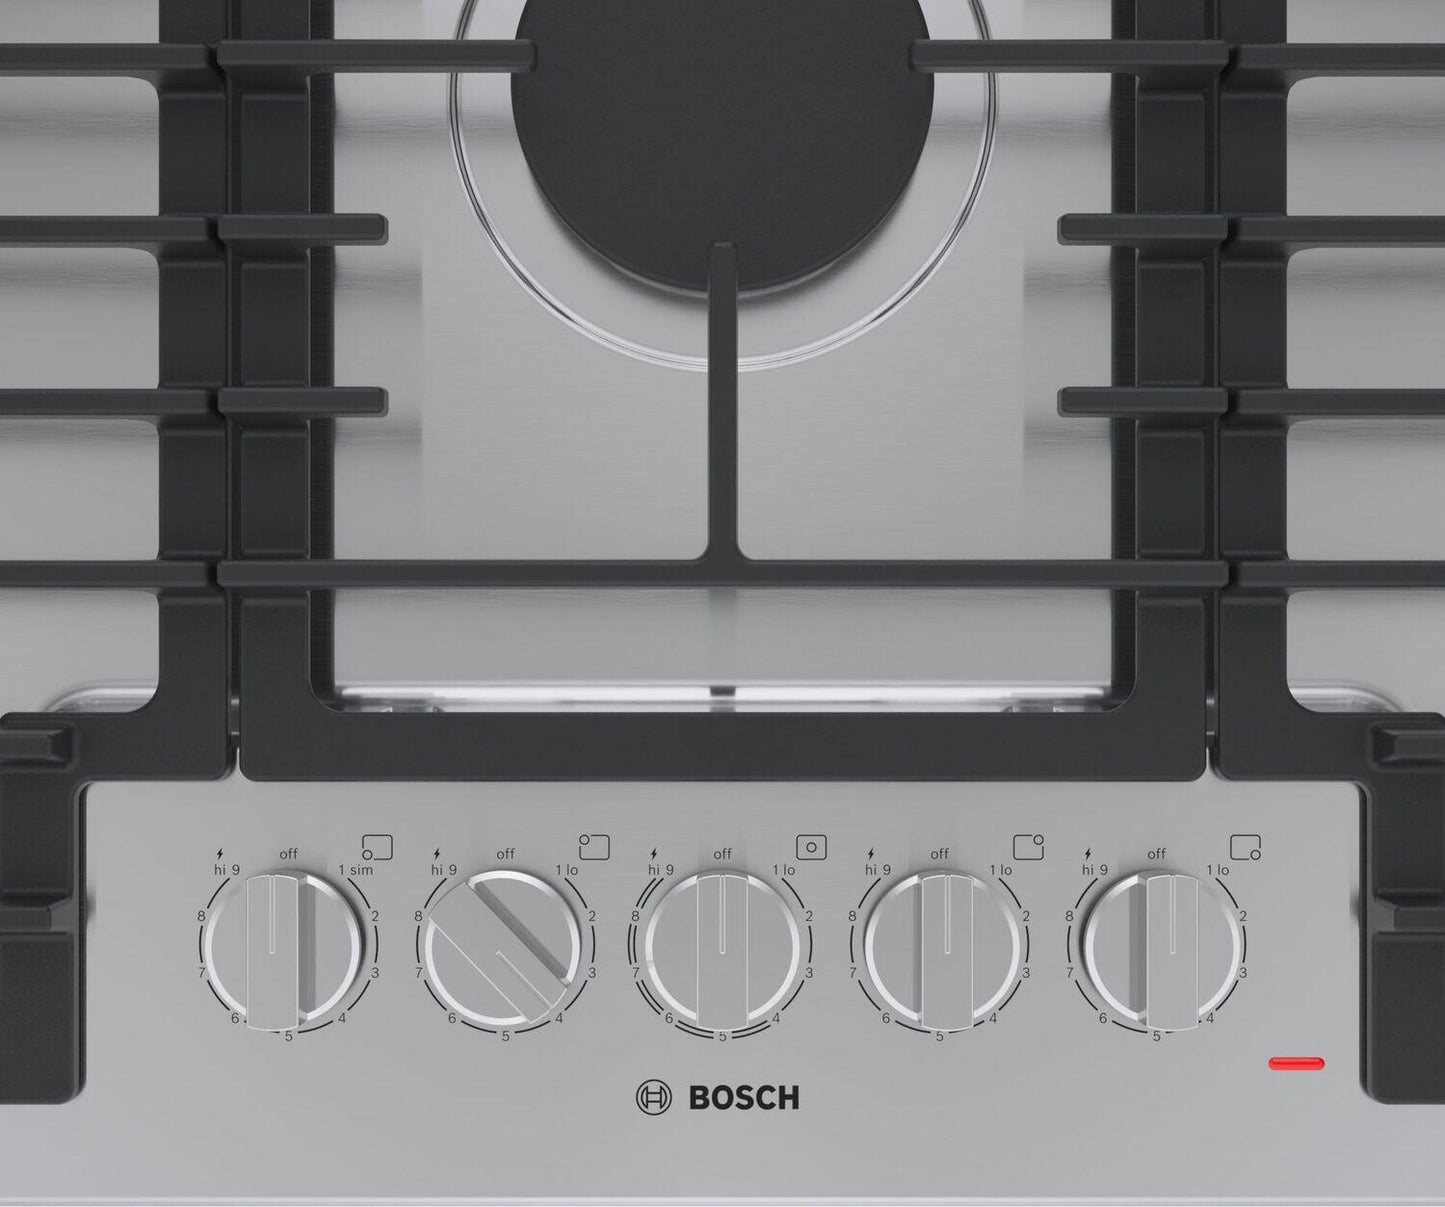 Bosch NGM5658UC 500 Series Gas Cooktop 36'' Stainless Steel Ngm5658Uc